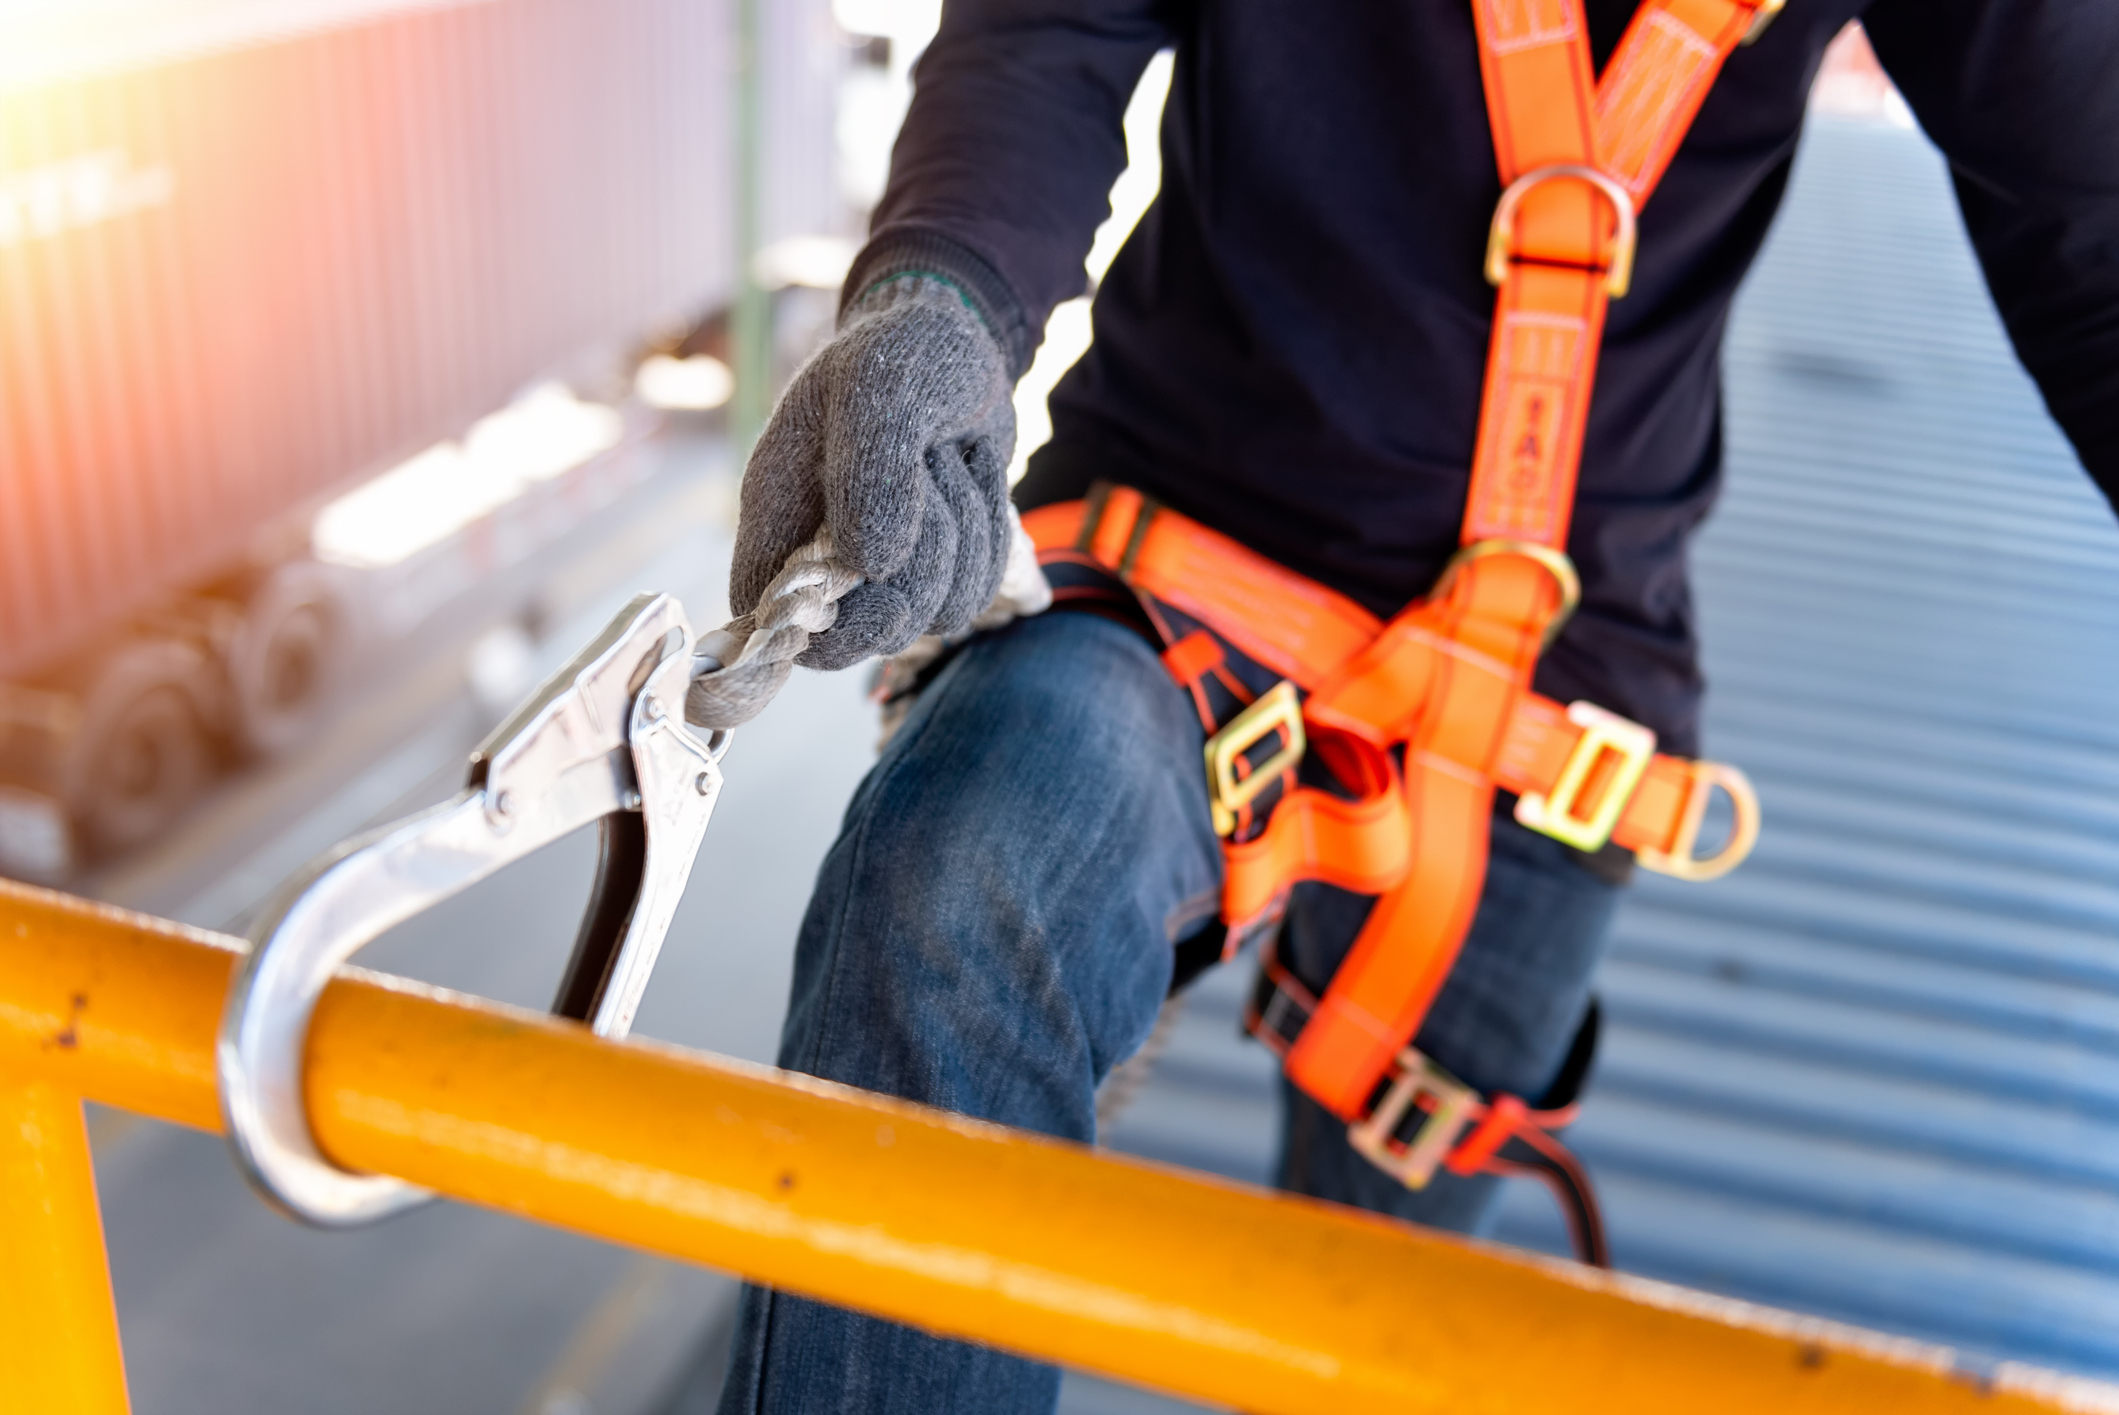 10 Most Dangerous Jobs for Personal Injury Accidents